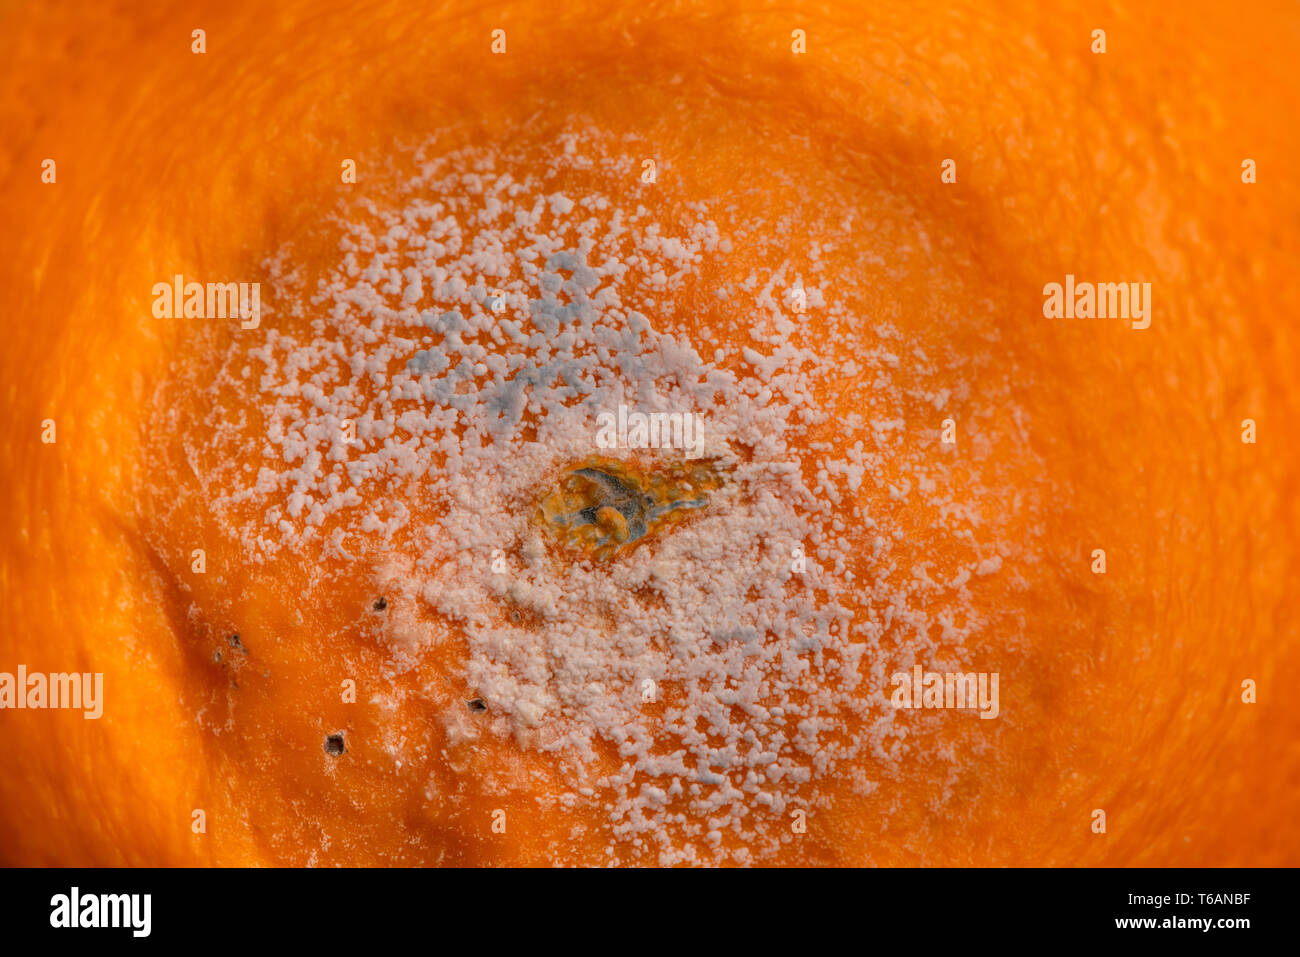 Decaying citrus fruit, orange, with spreading internal fungal decomposition spreads in circular pattern with some surface pin mould, penicillin Stock Photo